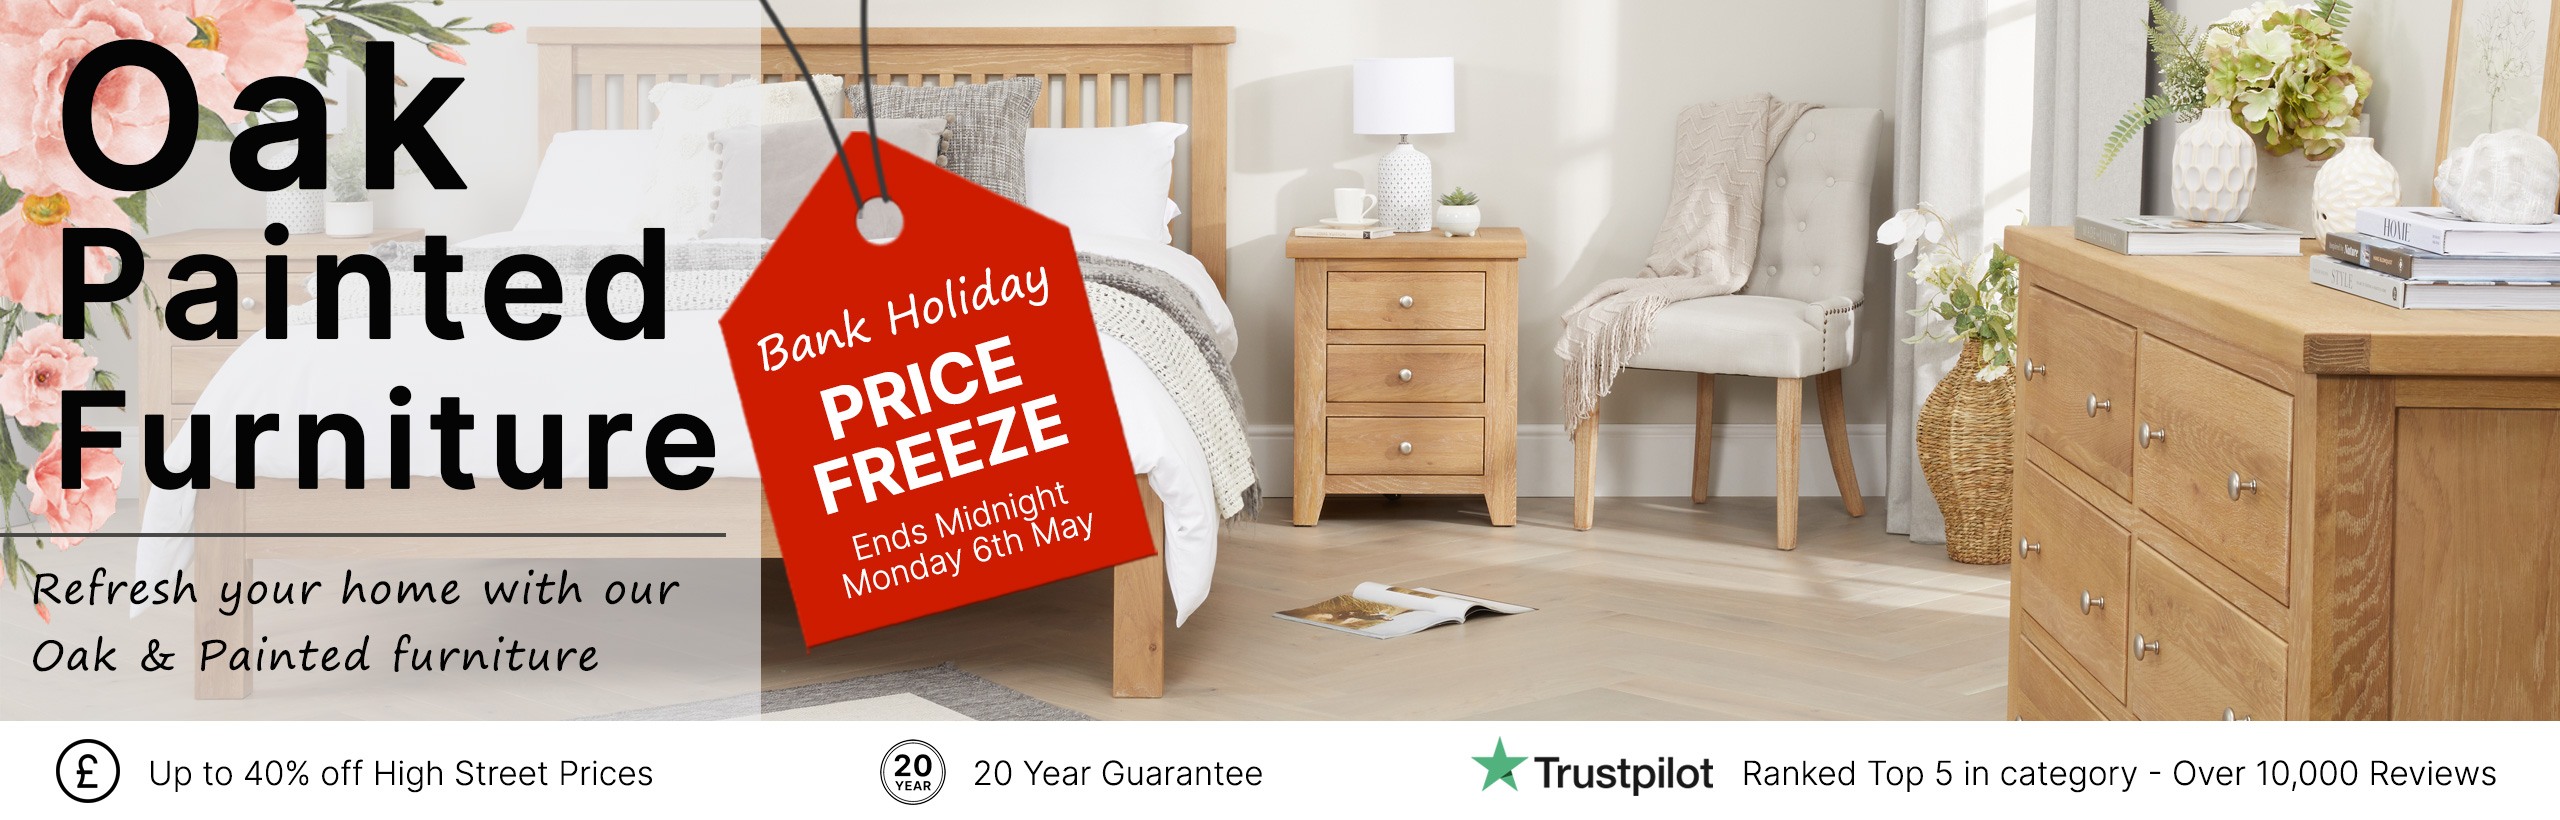 May Bank Holiday Price freeze on Oak & Painted Furniture